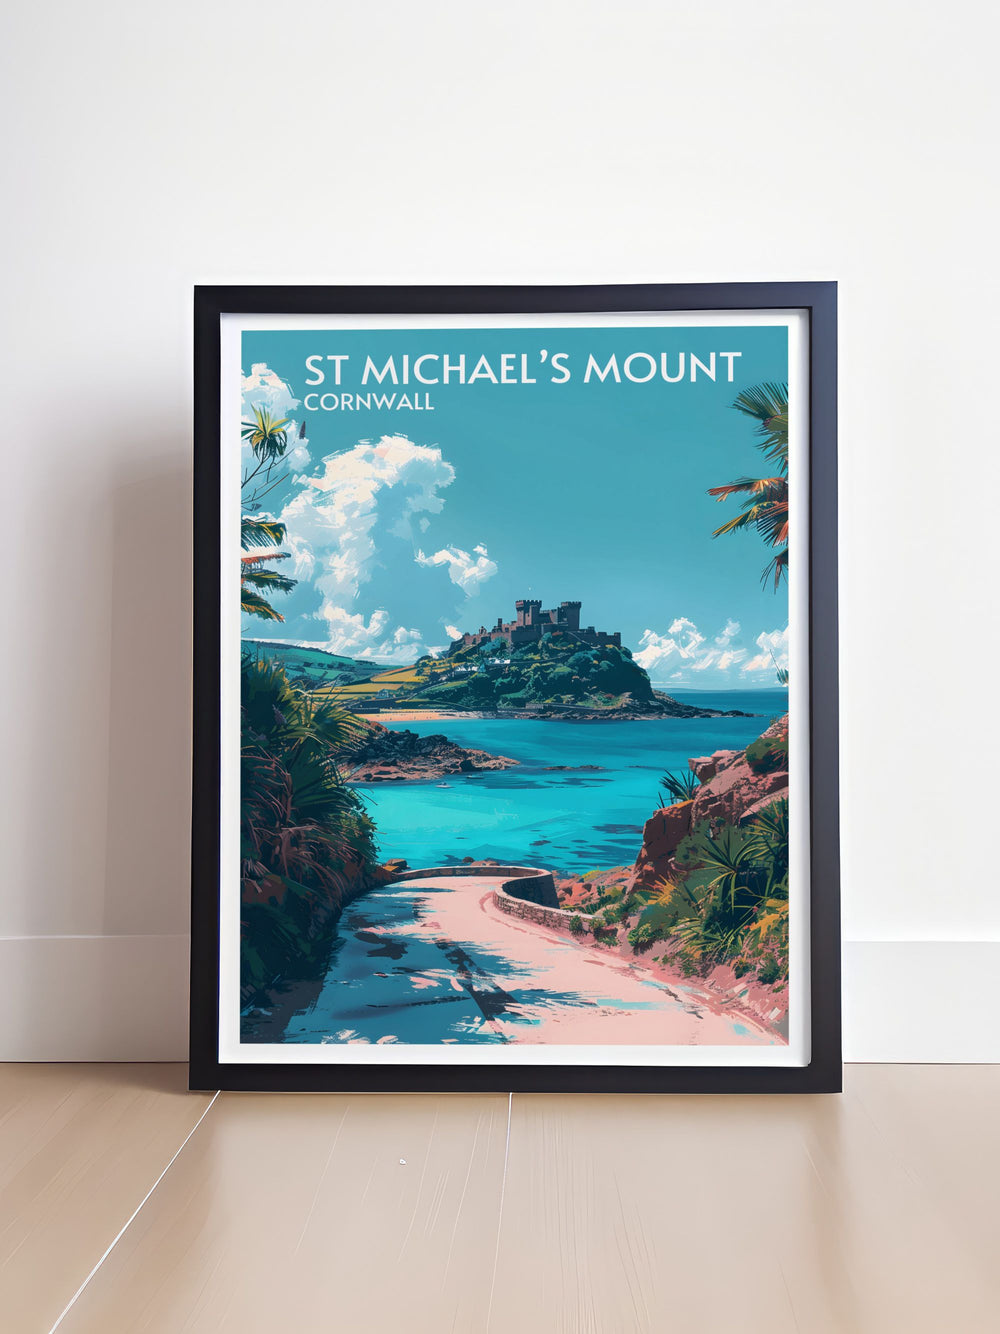 South West Coast Path wall art highlighting the rugged cliffs sandy beaches and quaint fishing villages along Englands coastline ideal for nature lovers and hiking enthusiasts.